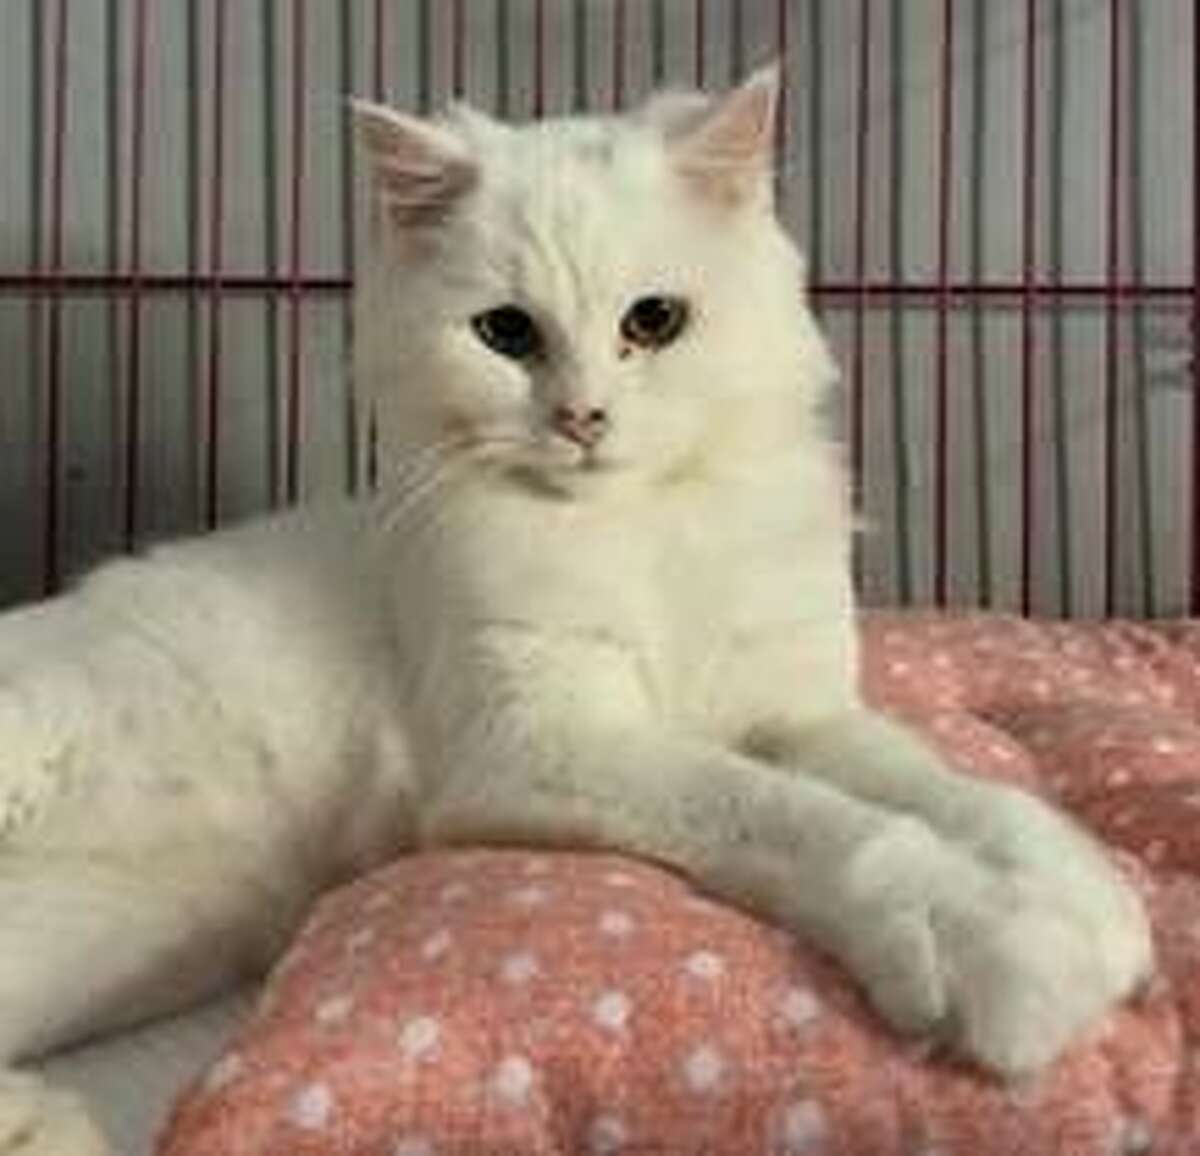 Pearl is among the cats from Beirut Lebanon available for adoption at the Mohawk Hudson Humane Society.